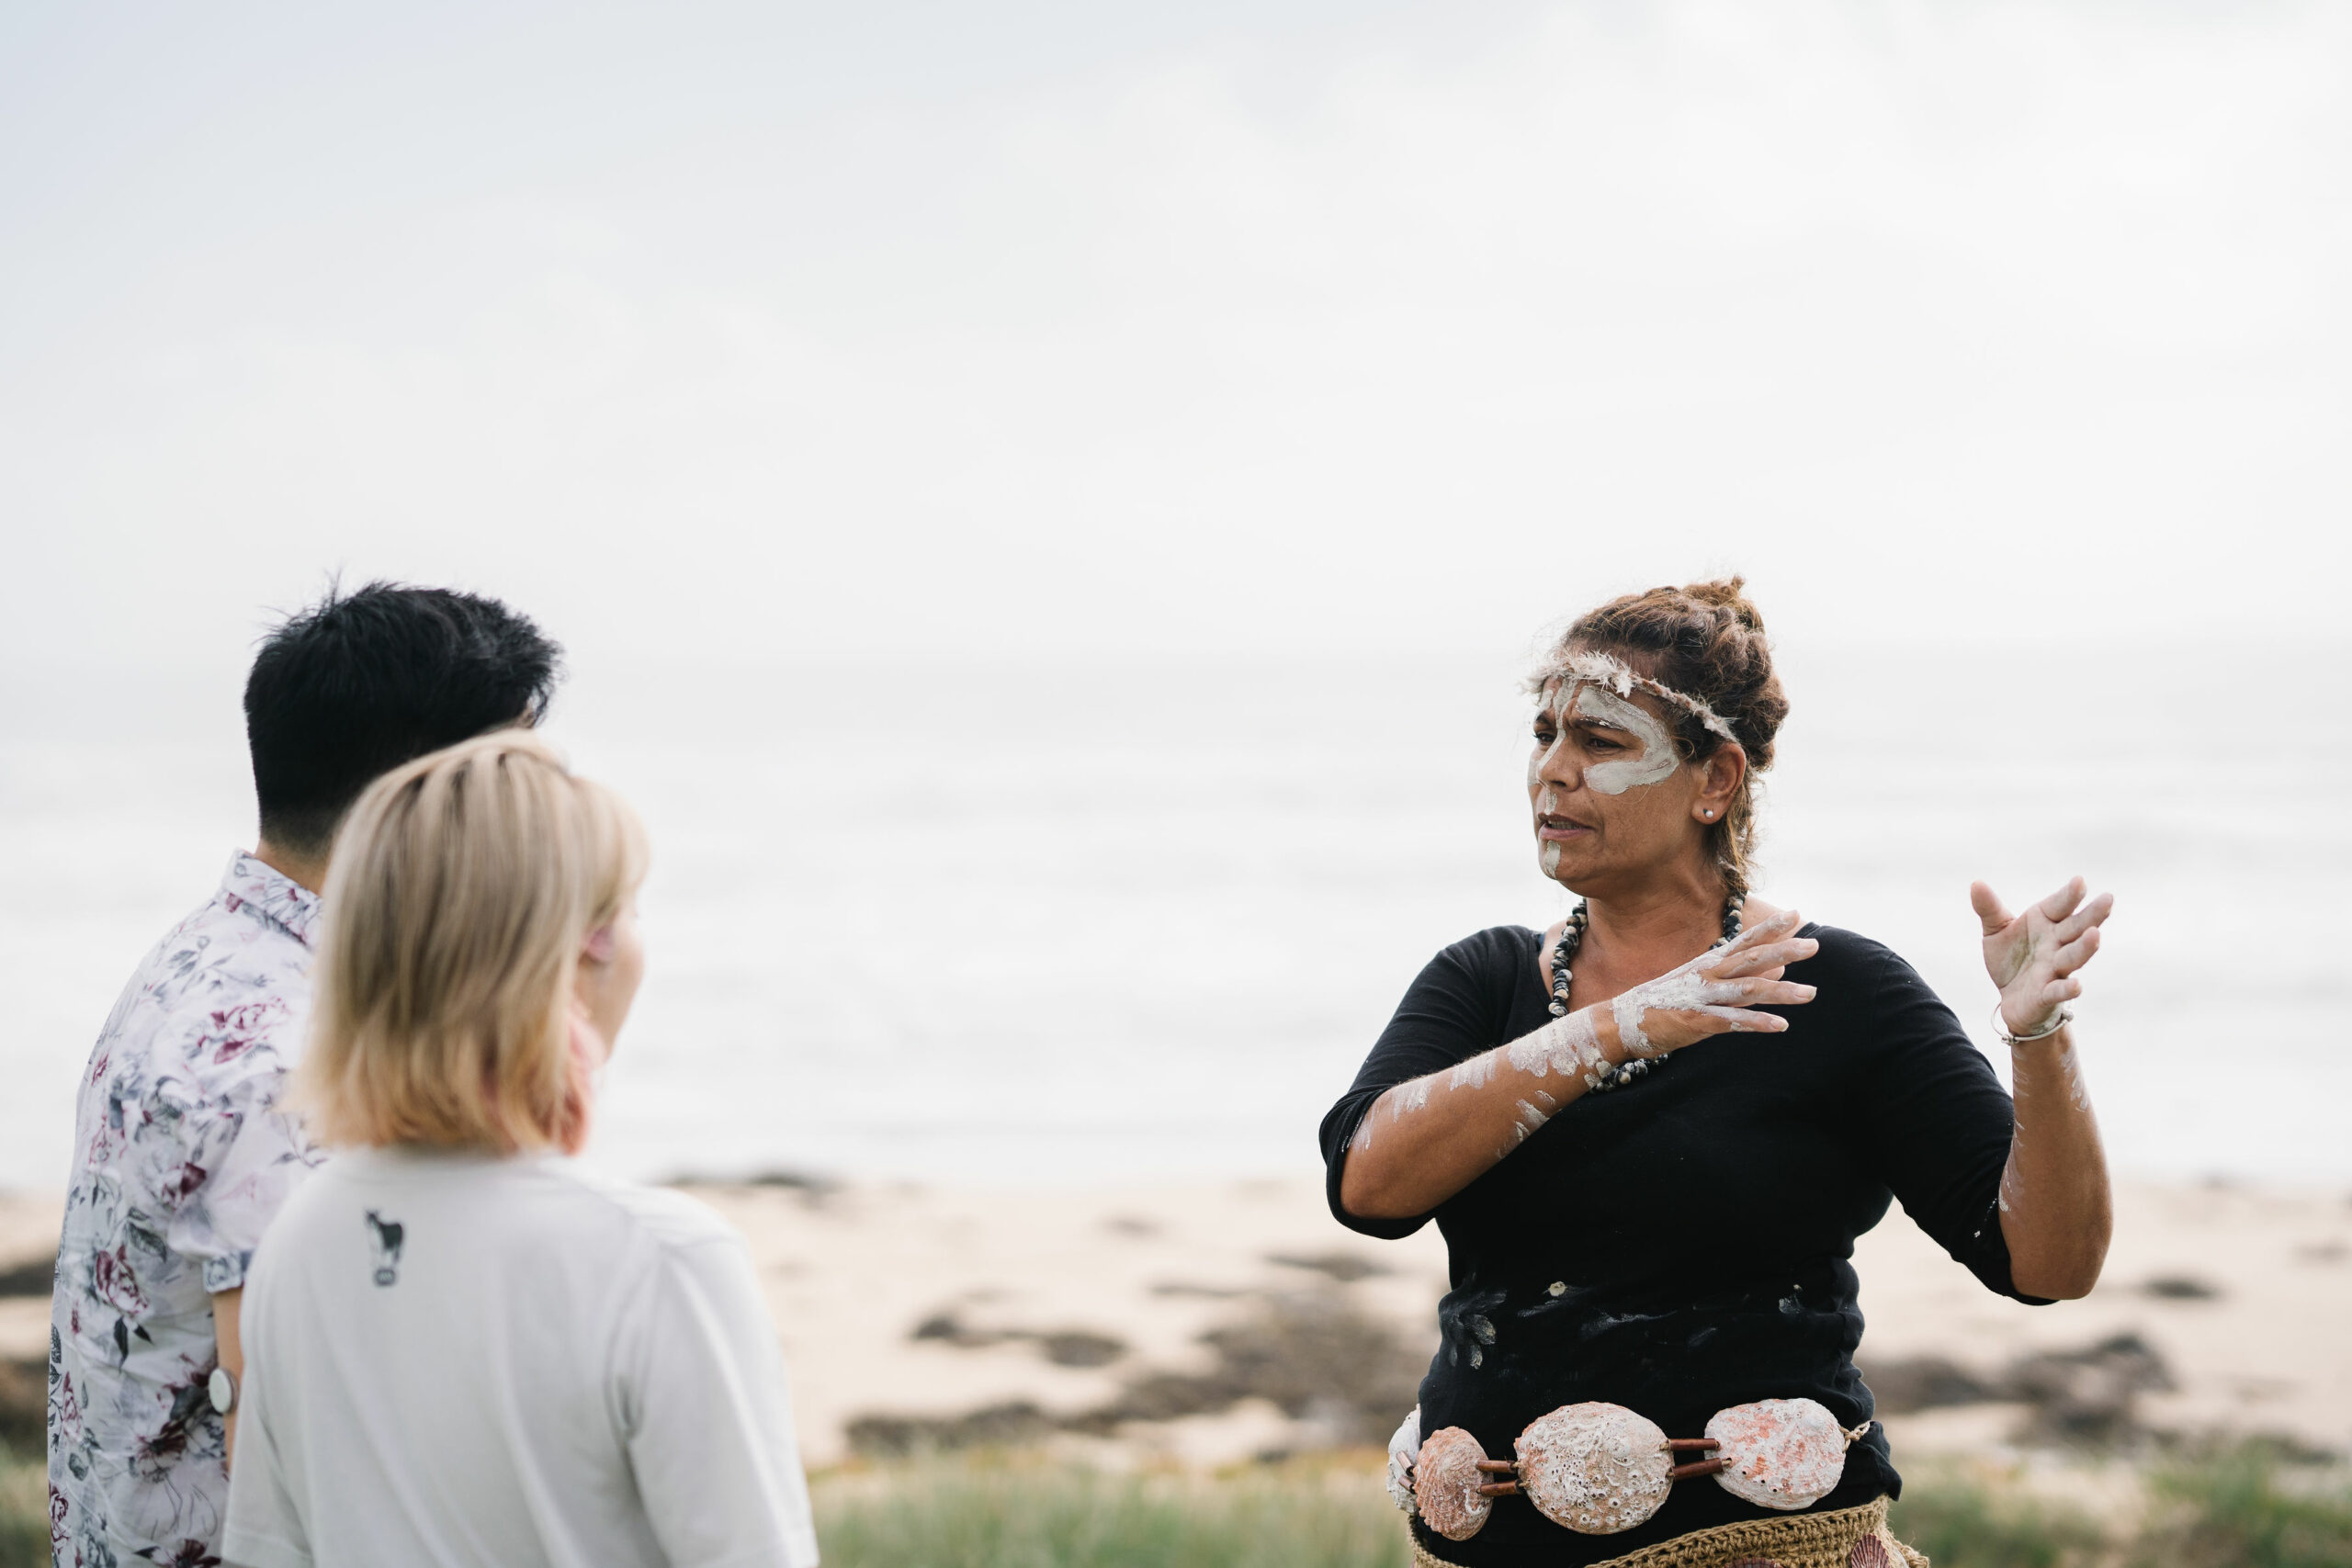 CONNECT TO COUNTRY (Jan 5) - MILLS BAY CULTURAL TOUR  WITH SHARON MASON OF GNARL CUTURAL TOURS